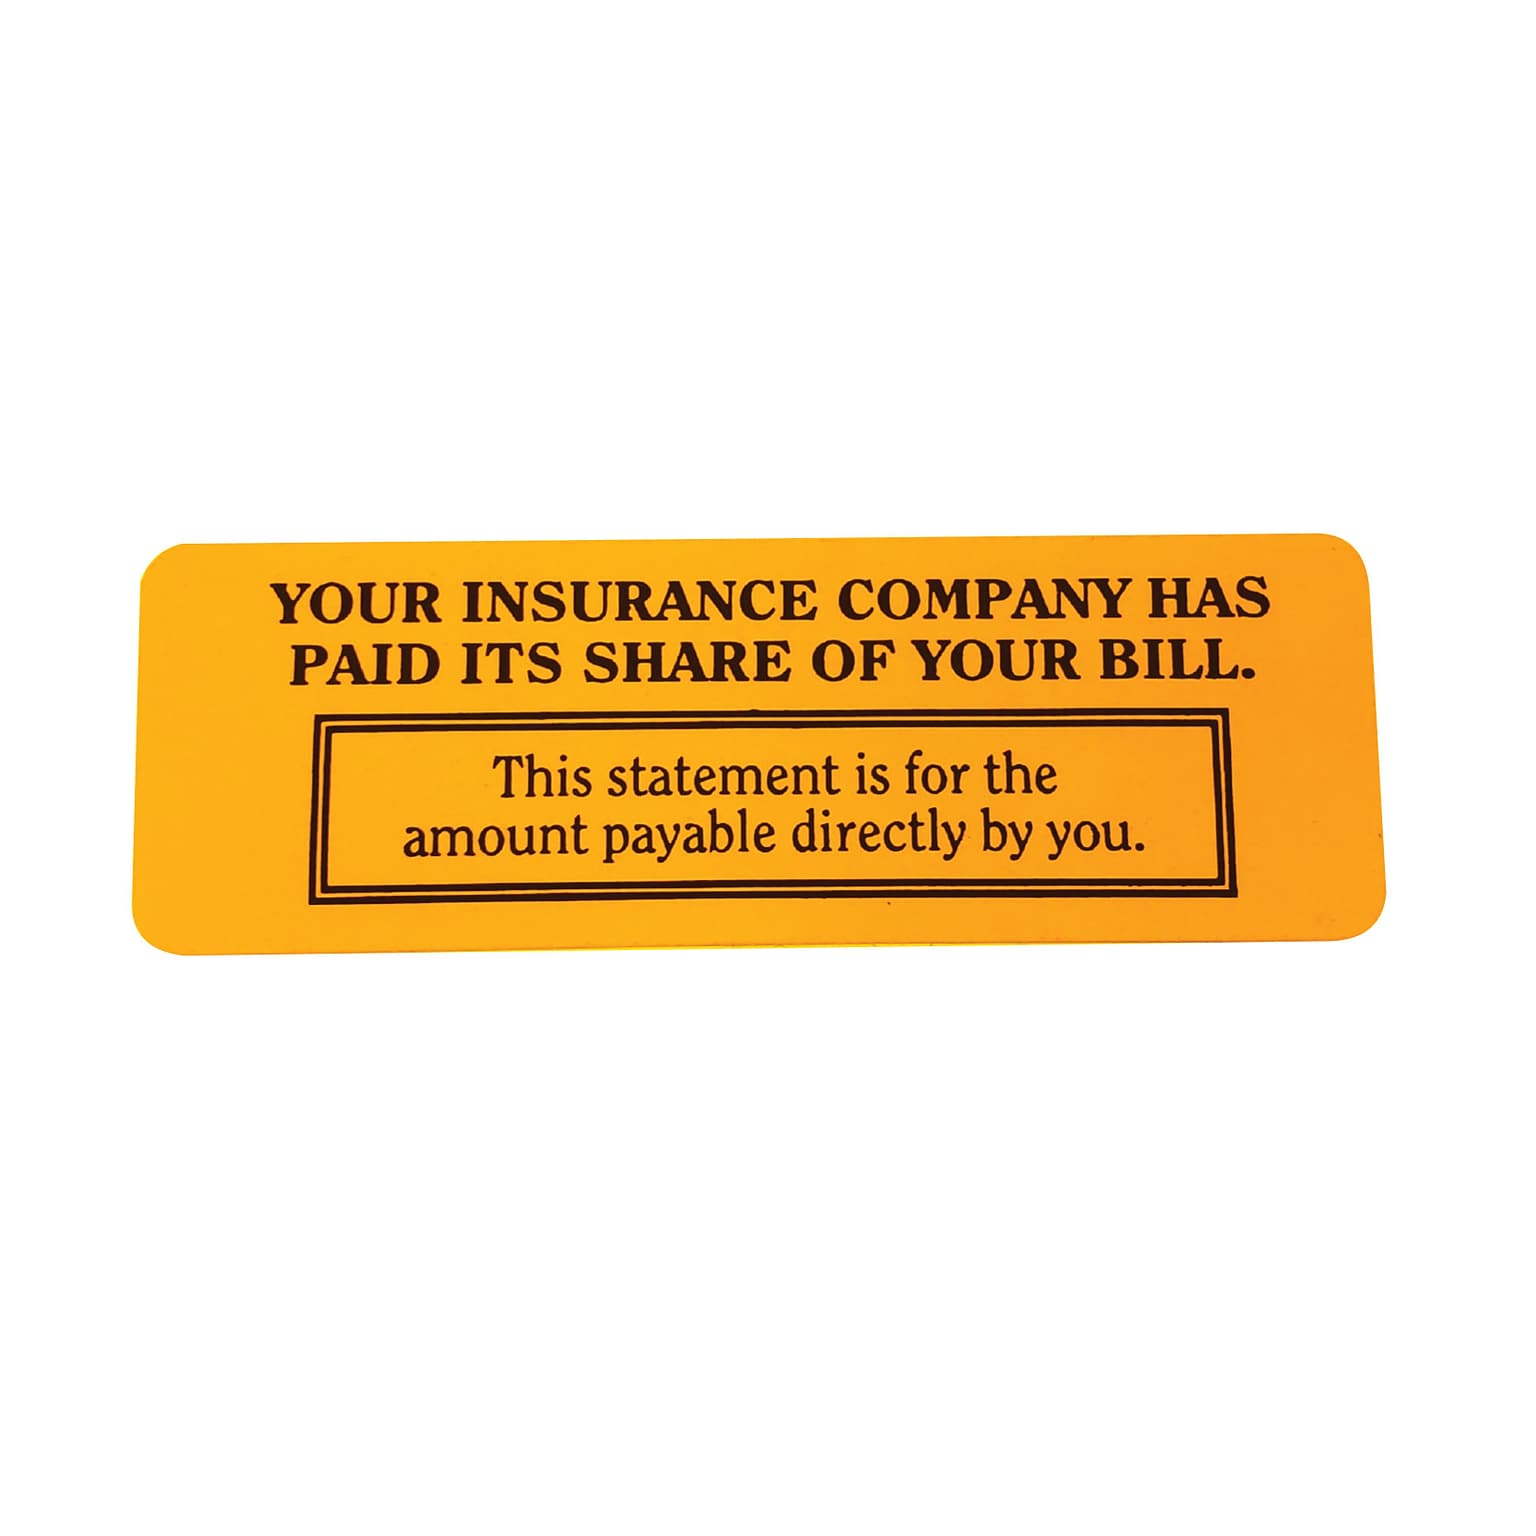 Medical Arts Press® Reminder & Thank You Collection Labels, Insur. Has Paid Its Share, Fl Orange, 1x3, 500 Labels